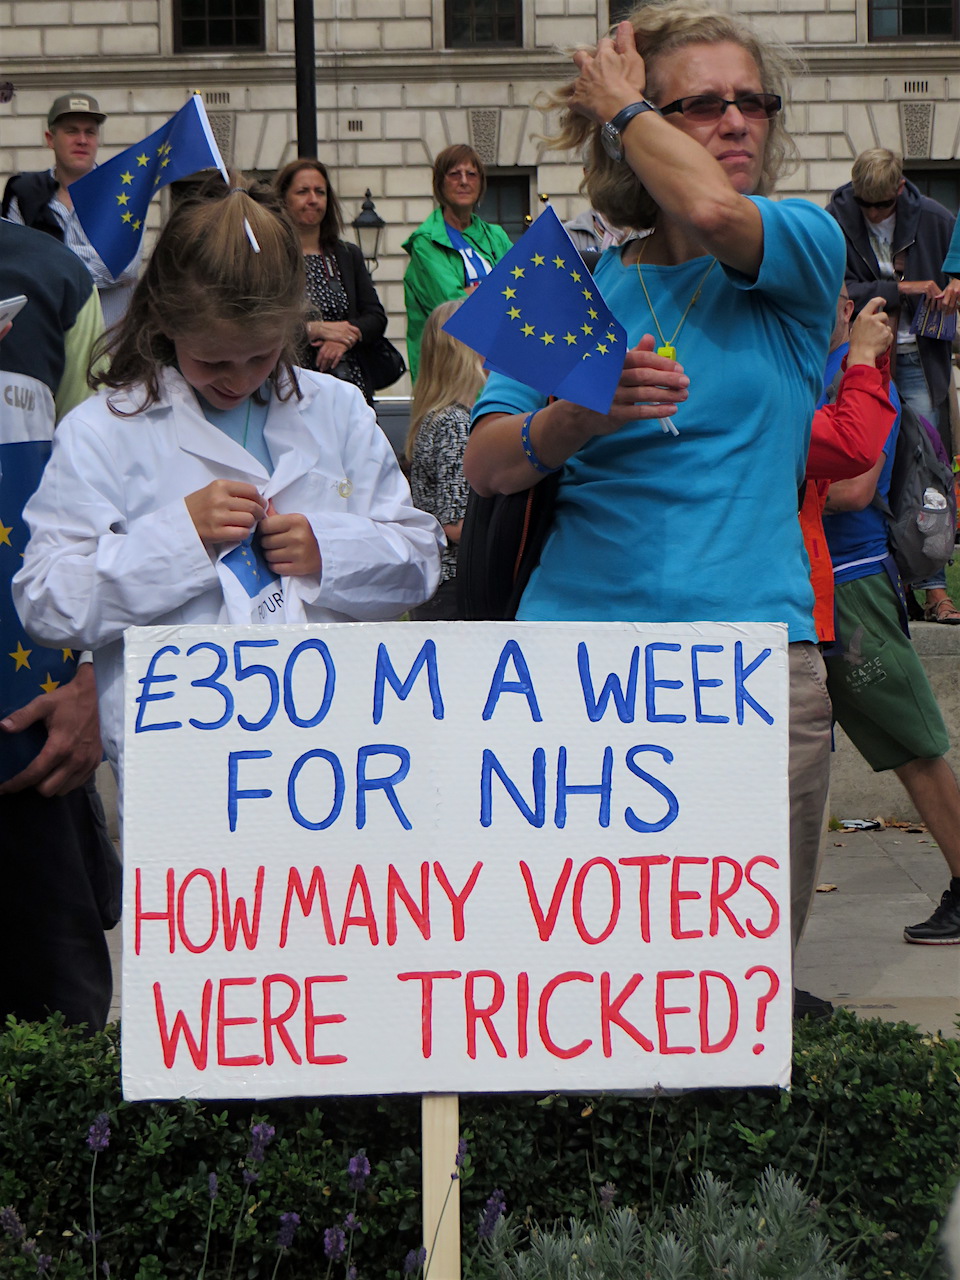 A placard on the March for Europe in London on September 3, 2016 addressing the Leave campaign's most egregious lie - that £350m a week would be saved by leaving the EU, money that would be used to support the NHS (Photo: Andy Worthington).